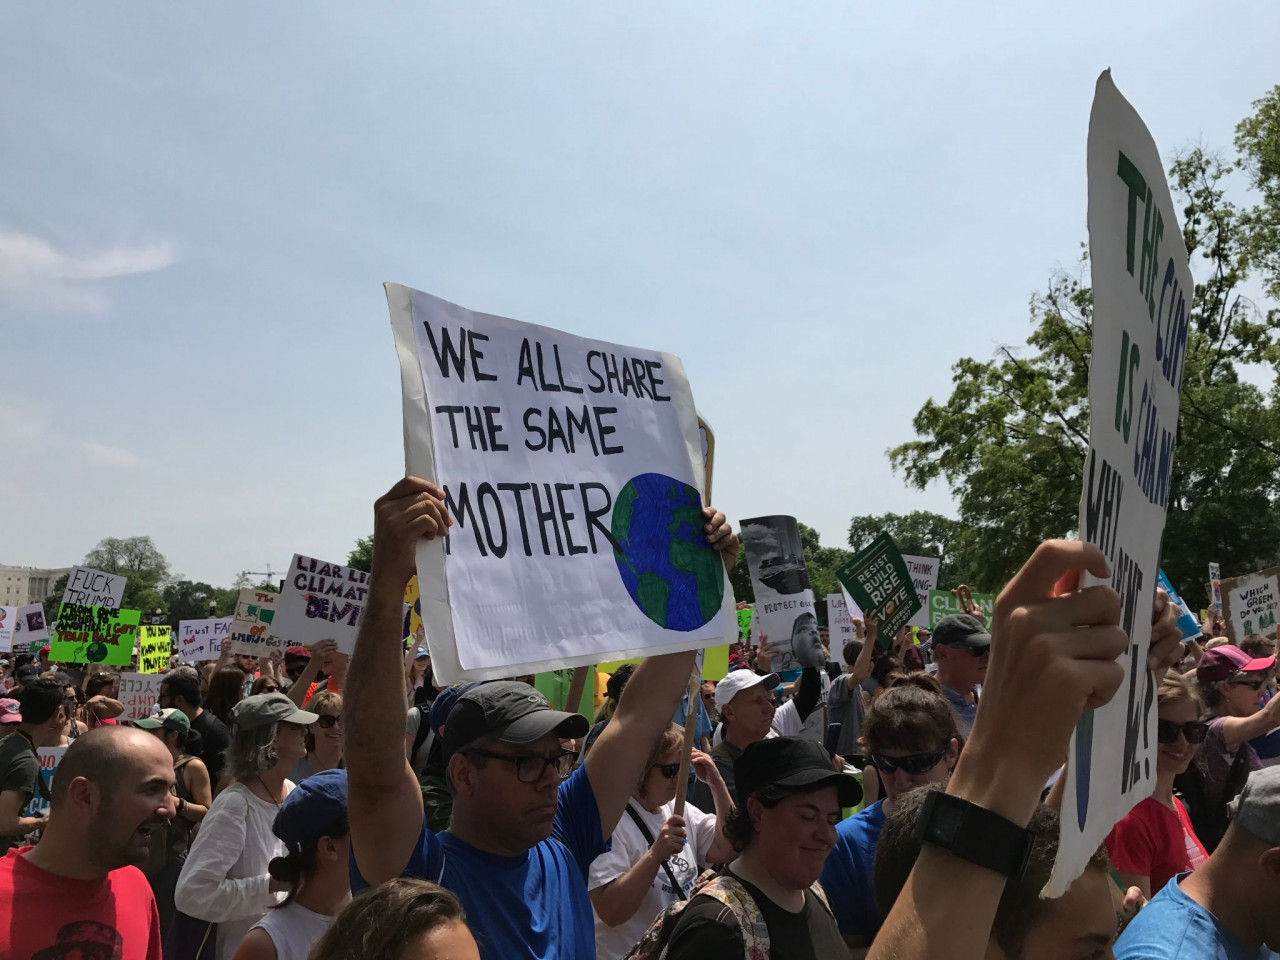 People's Climate March 2017 - We all share the same mother